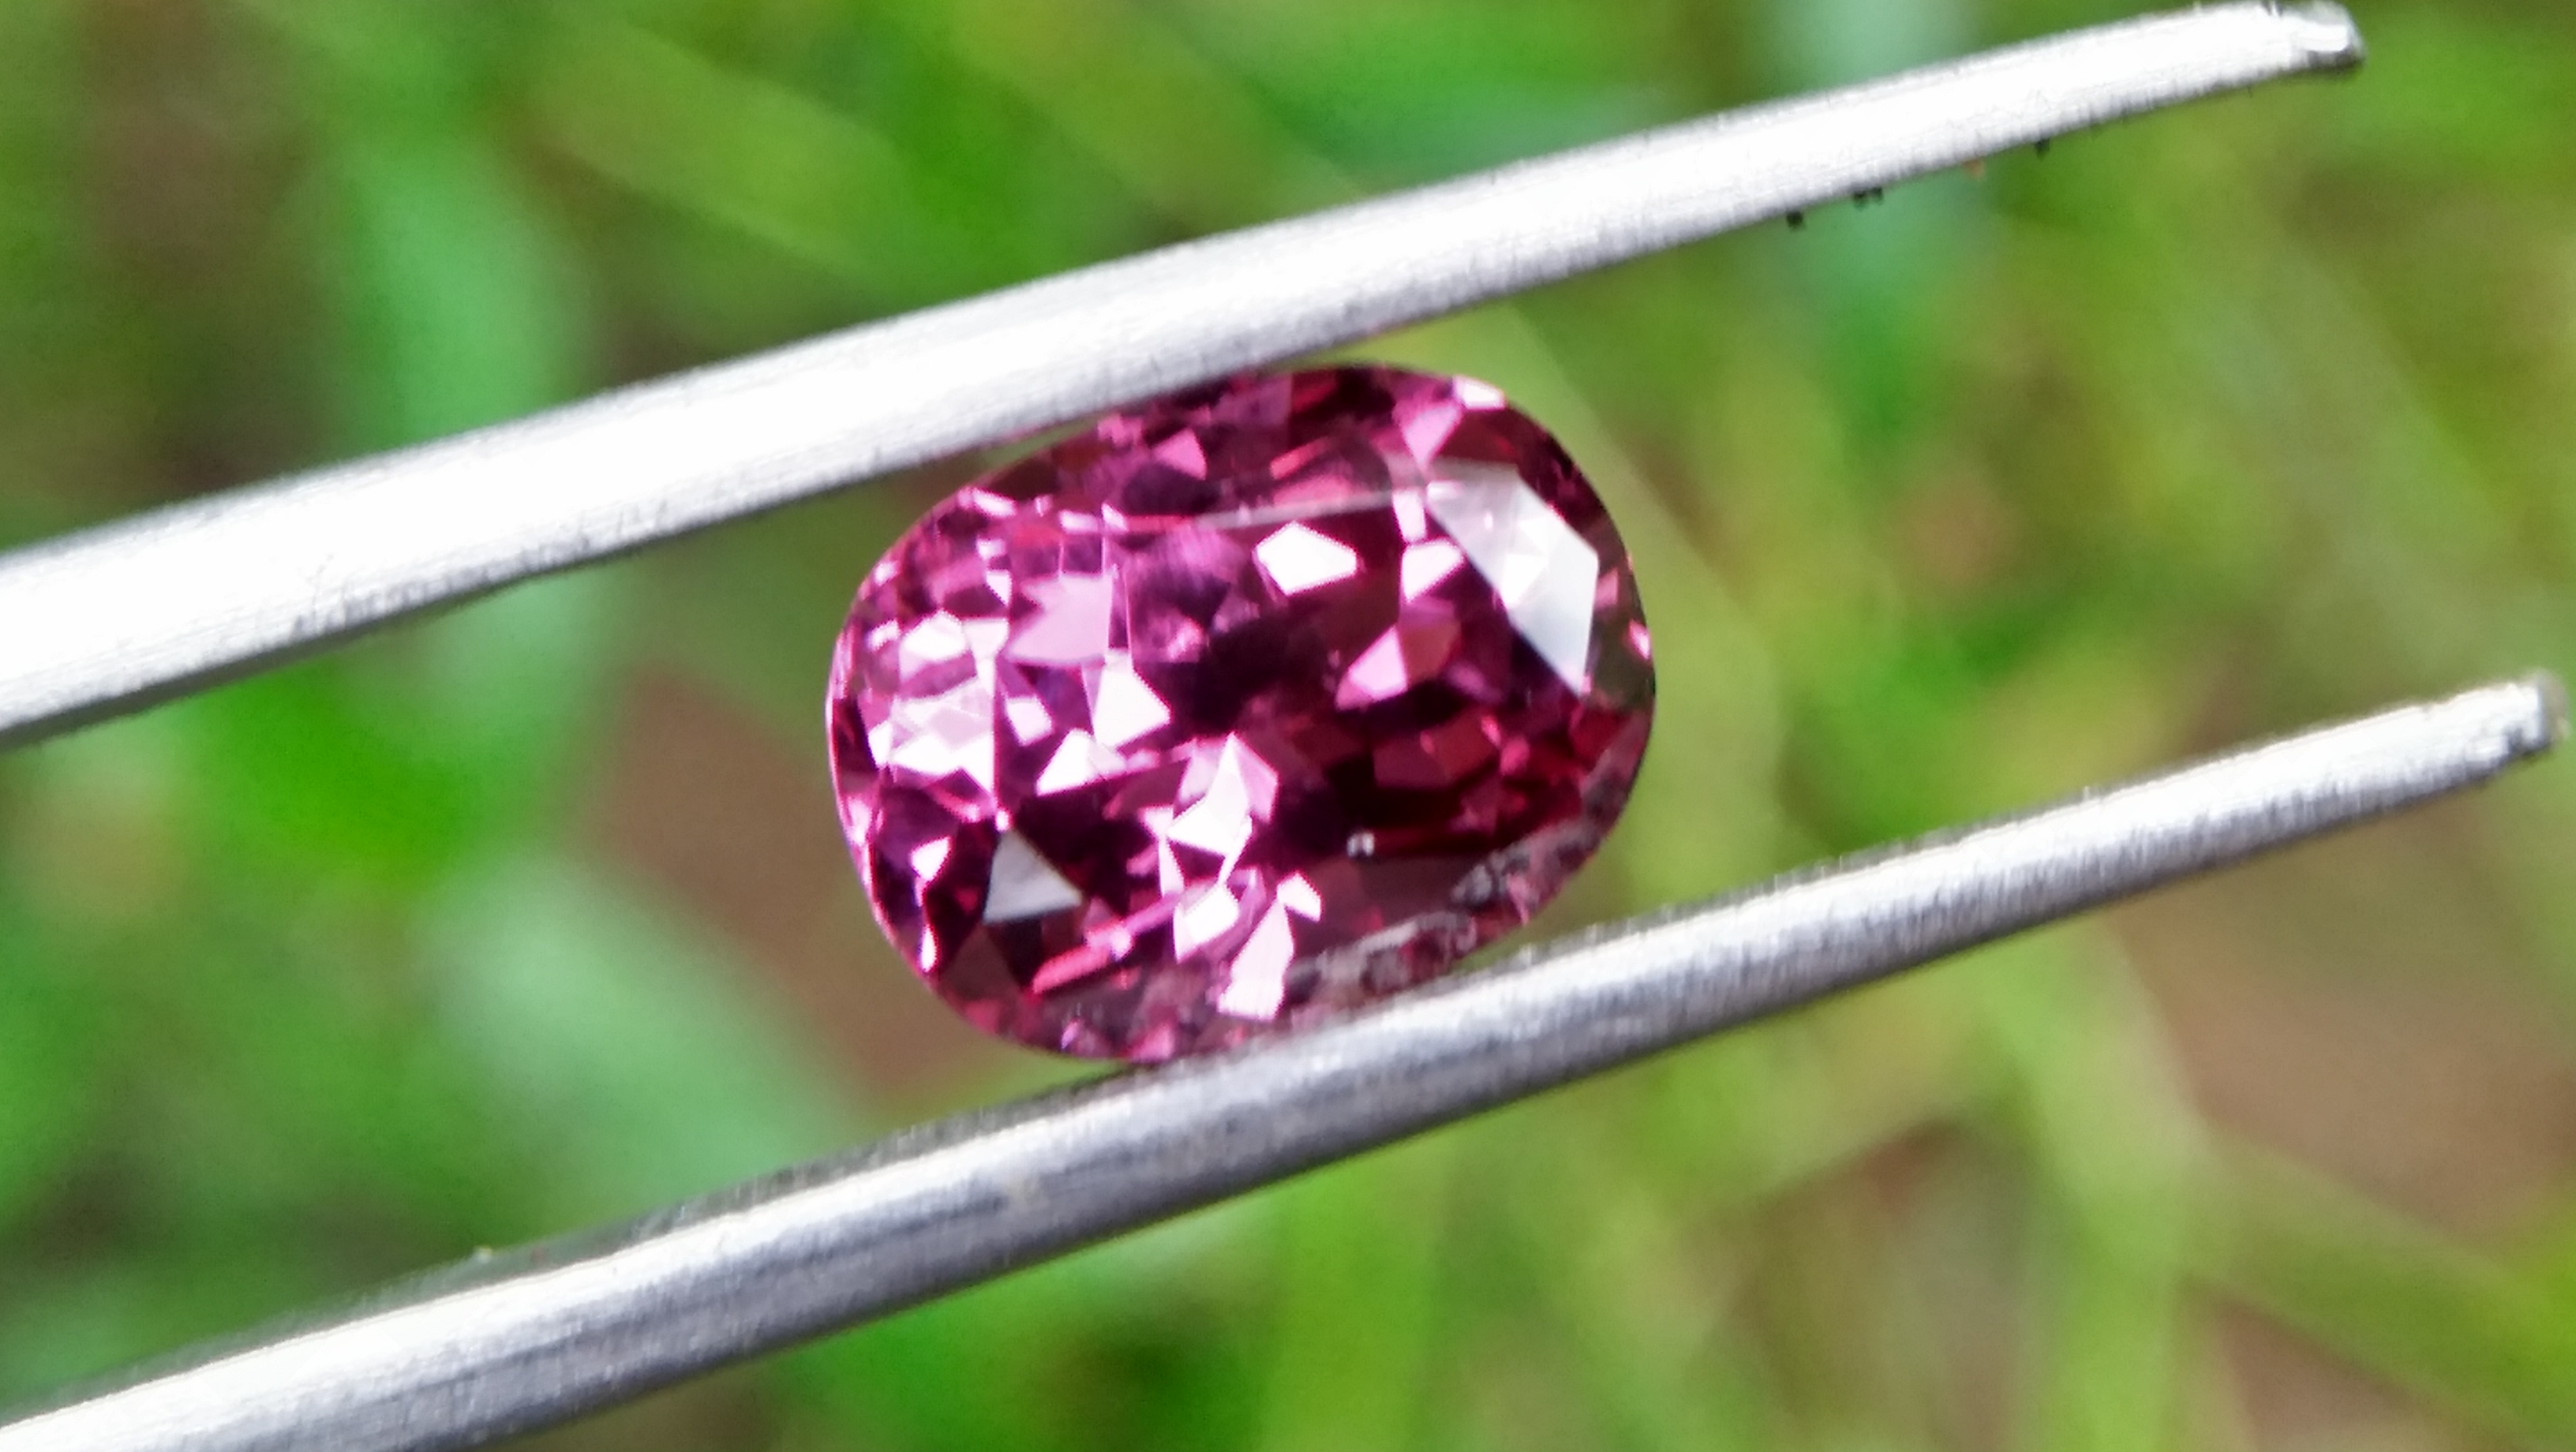 Natural Pink Garnet Weight: 2.15Cts Dimension: 8.4mm x 6.4mm x 4.9mm Colour: Reddish Pink Clarity : SI Birthstone : January Treatment : Unheated/Natural